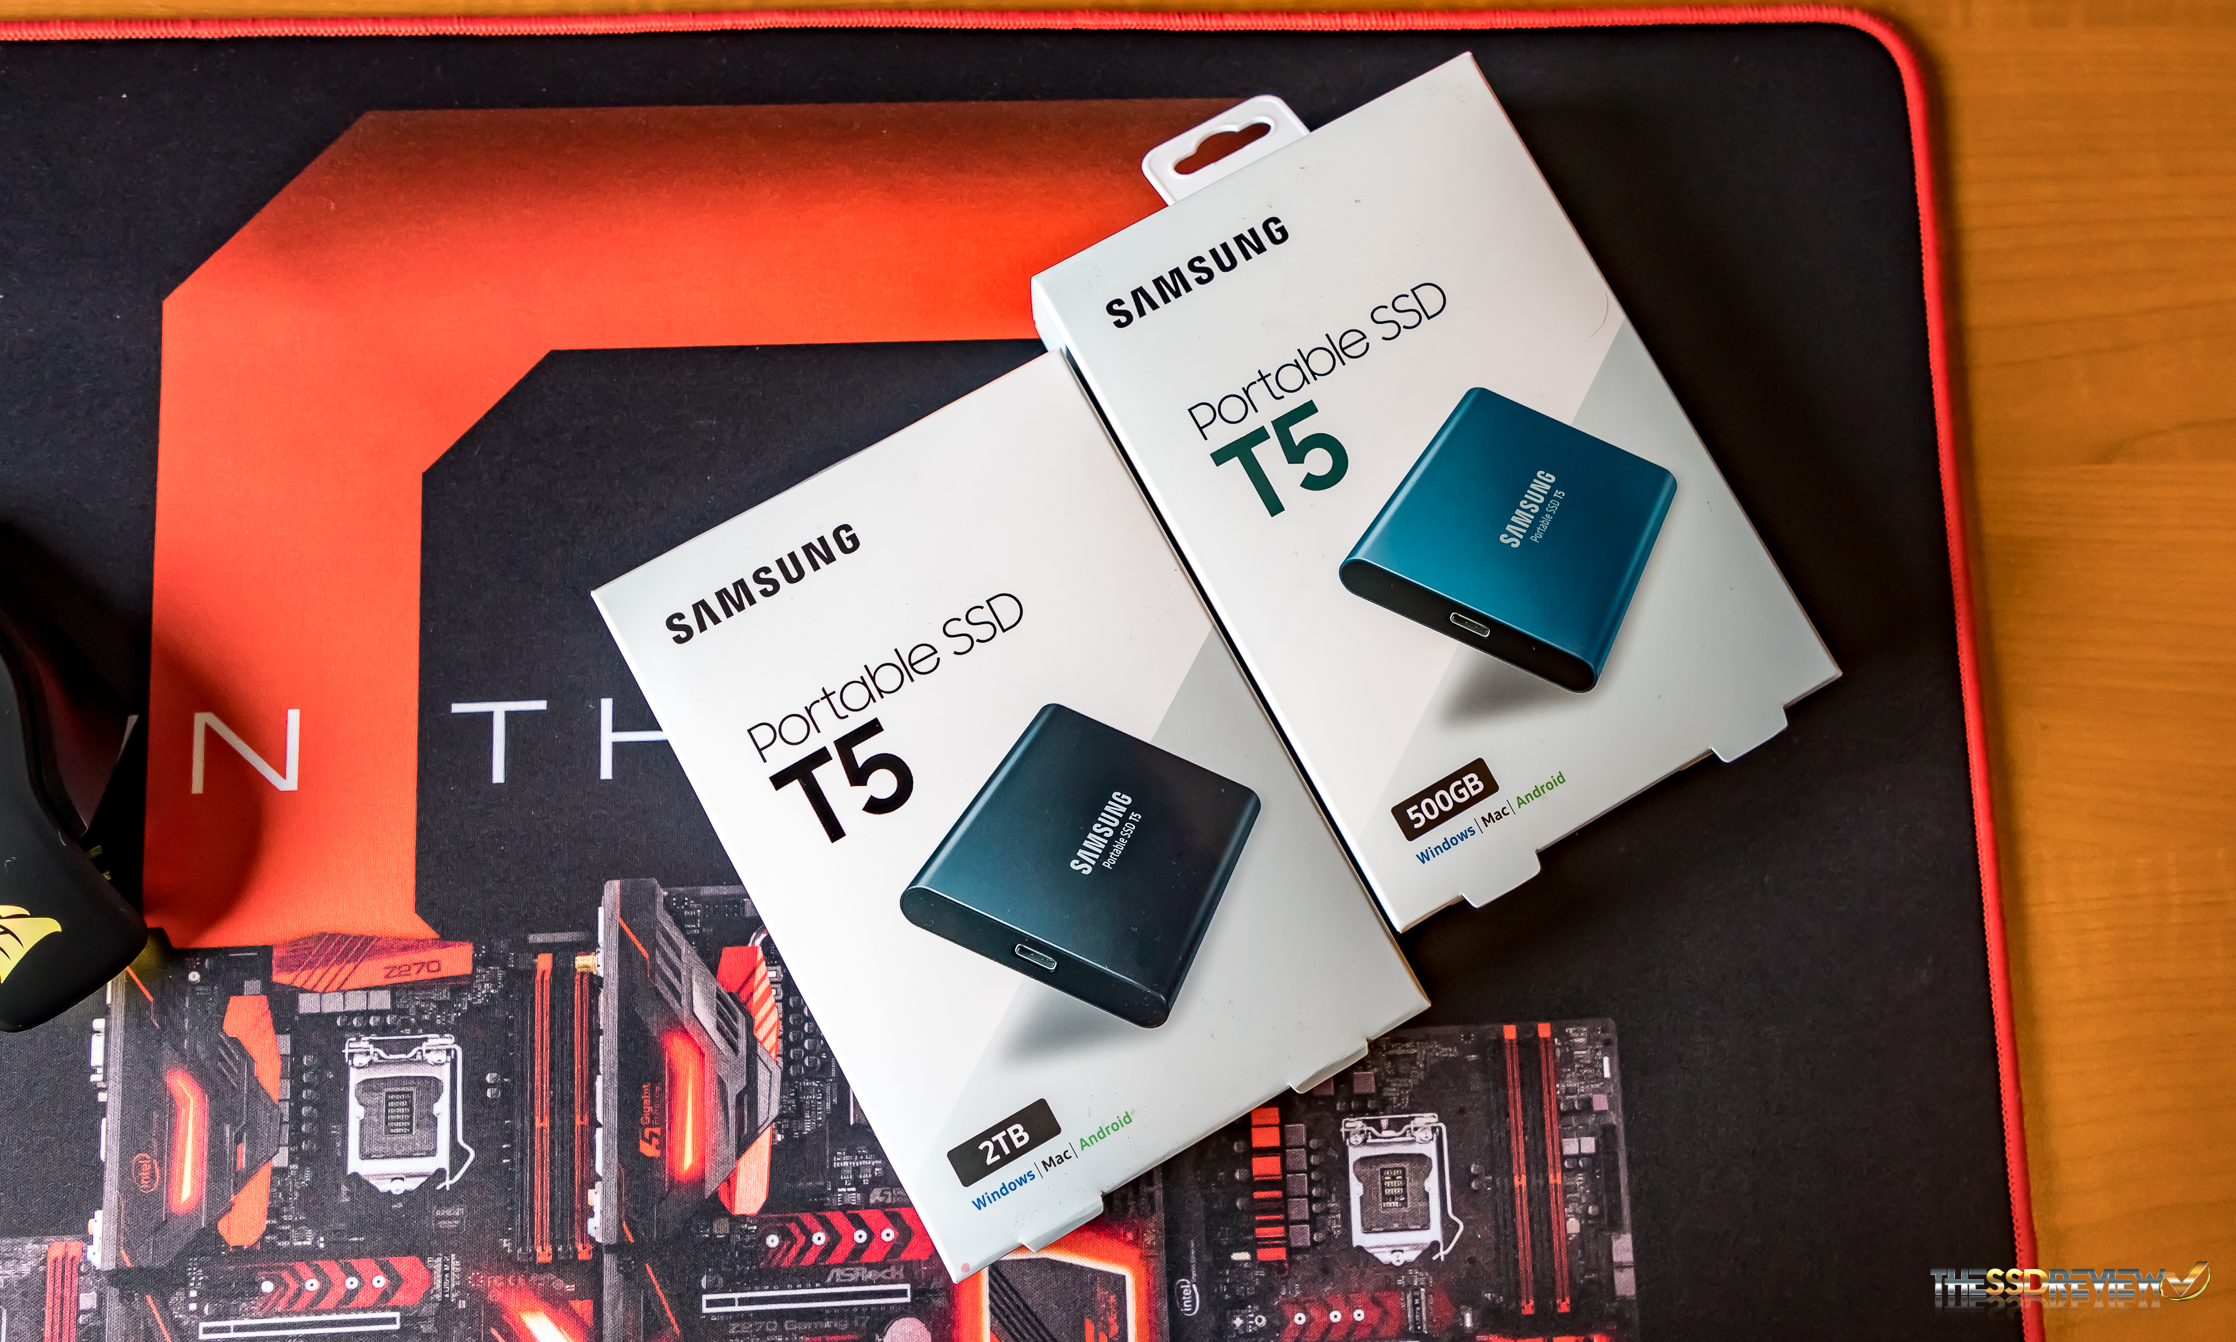 Samsung Portable T5 Review (500GB/2TB) - The Standard The Review